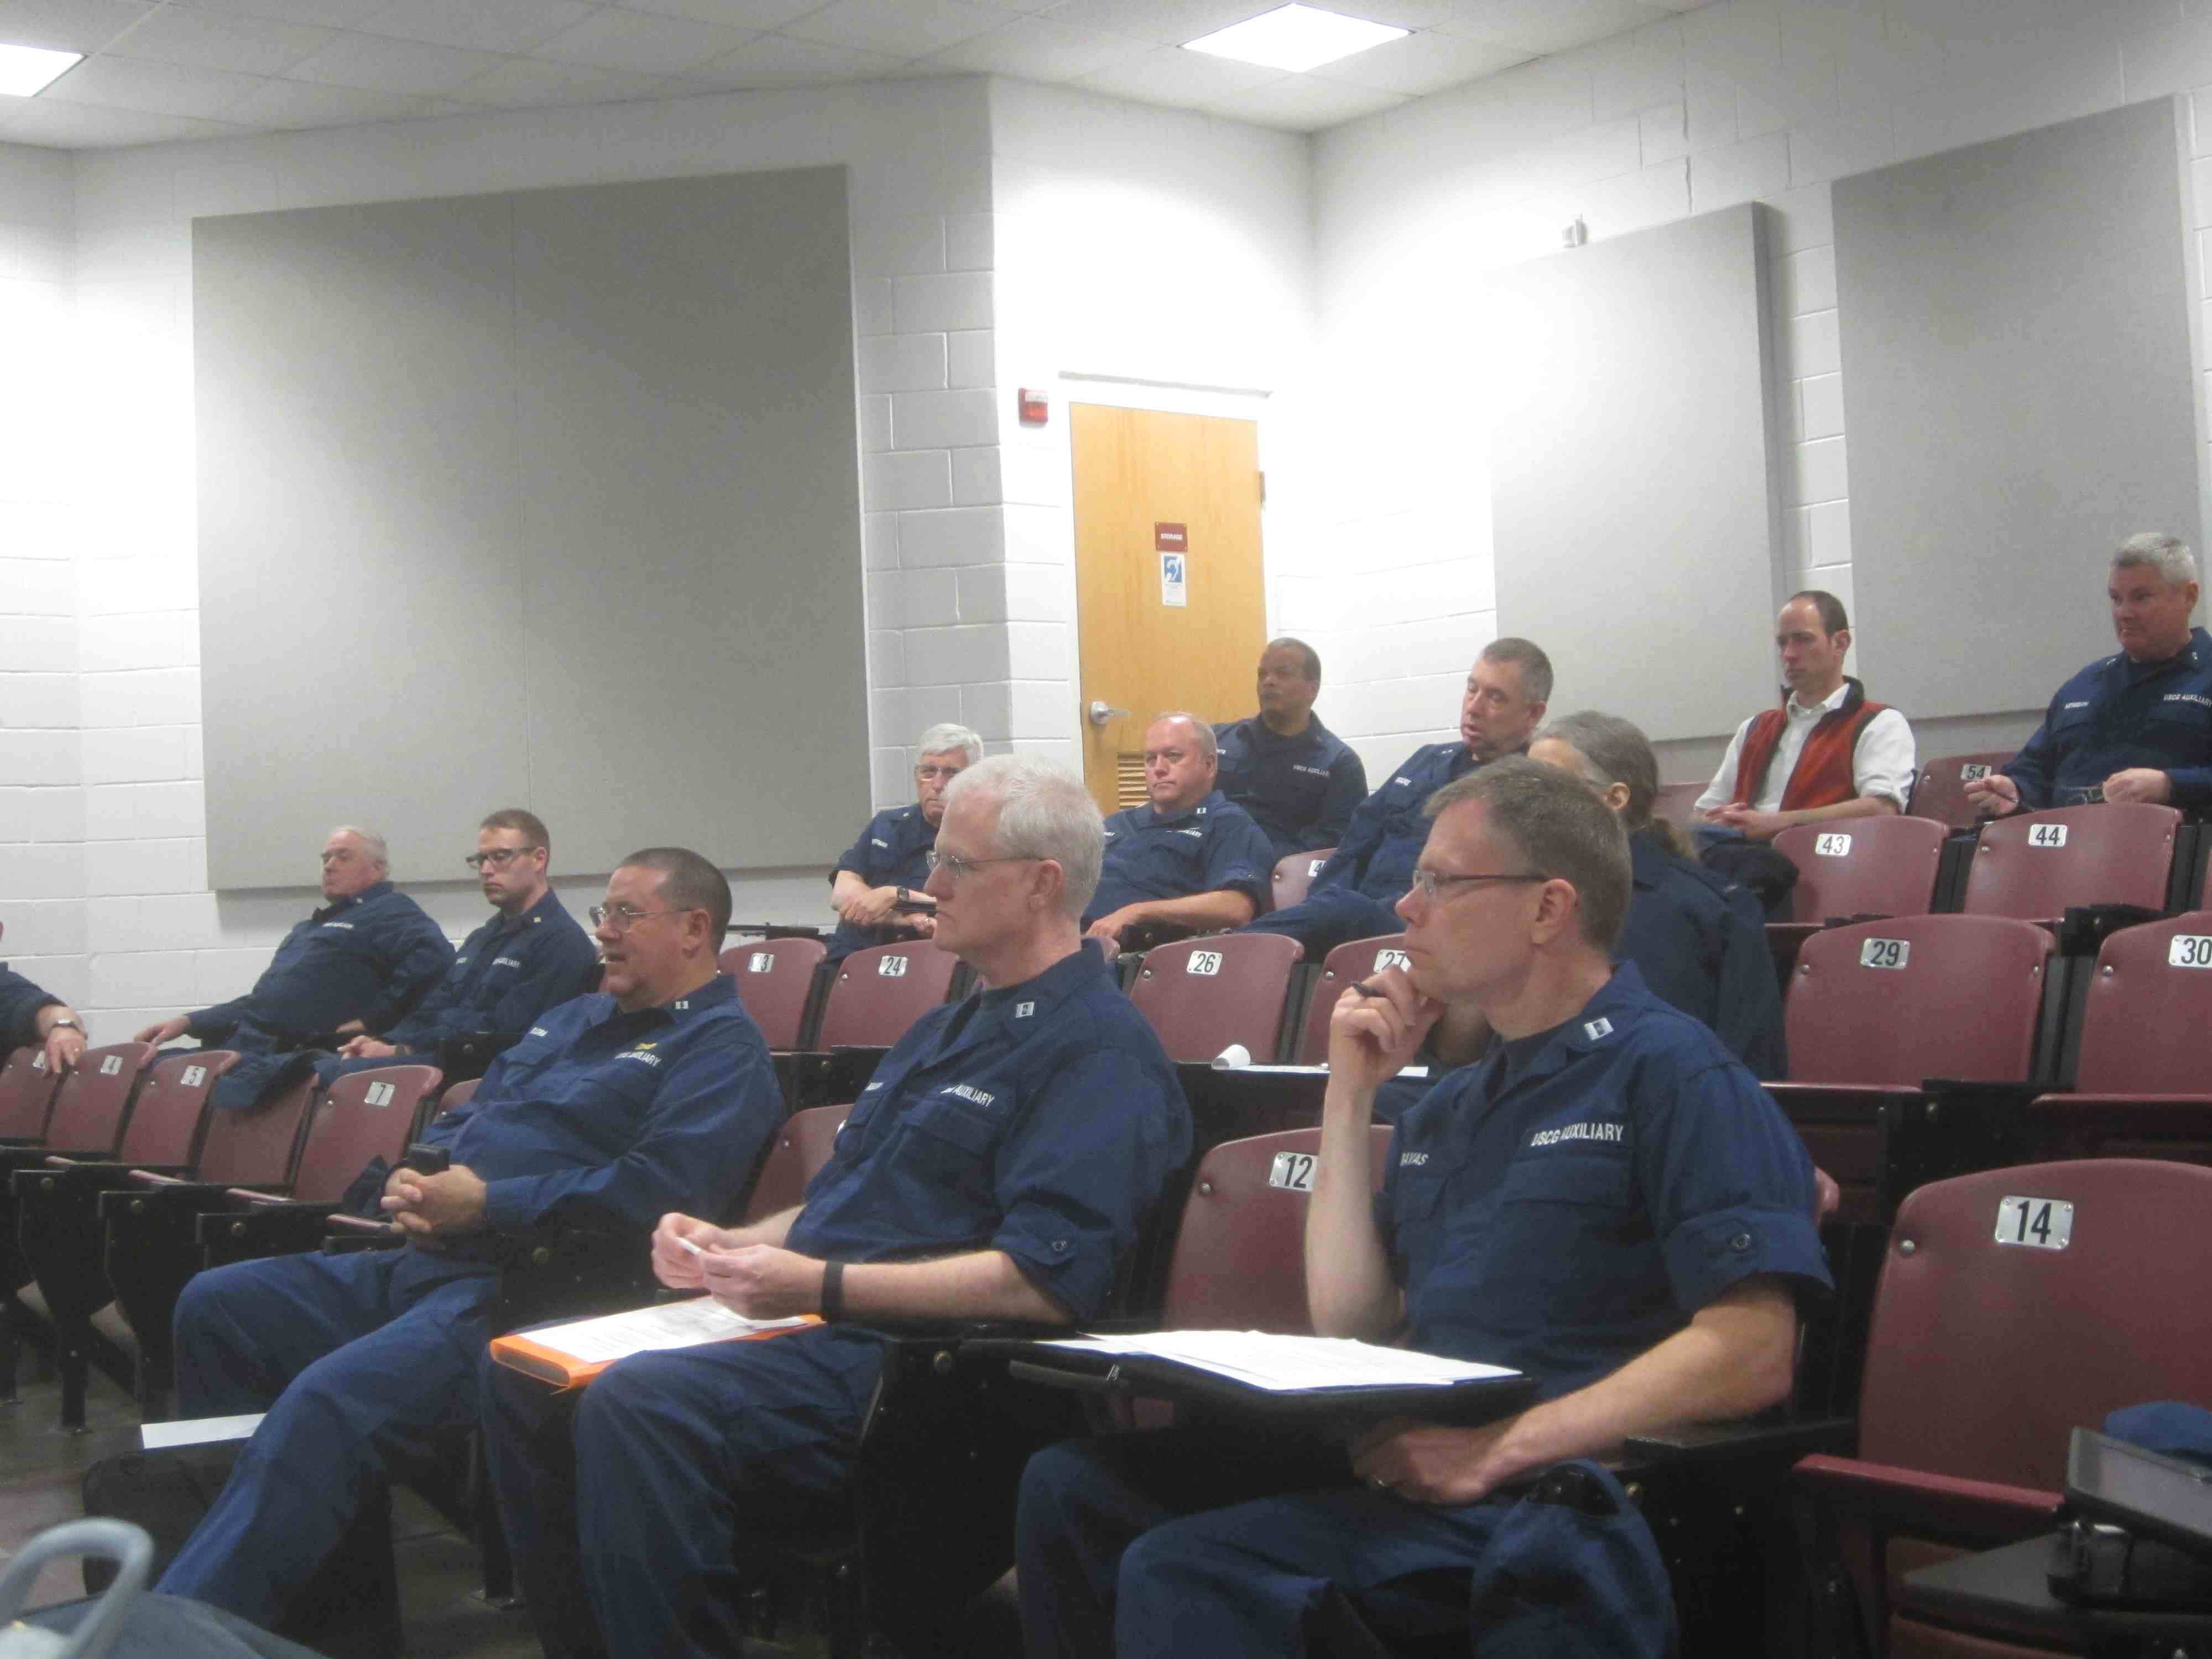 Division members participating in Communications training